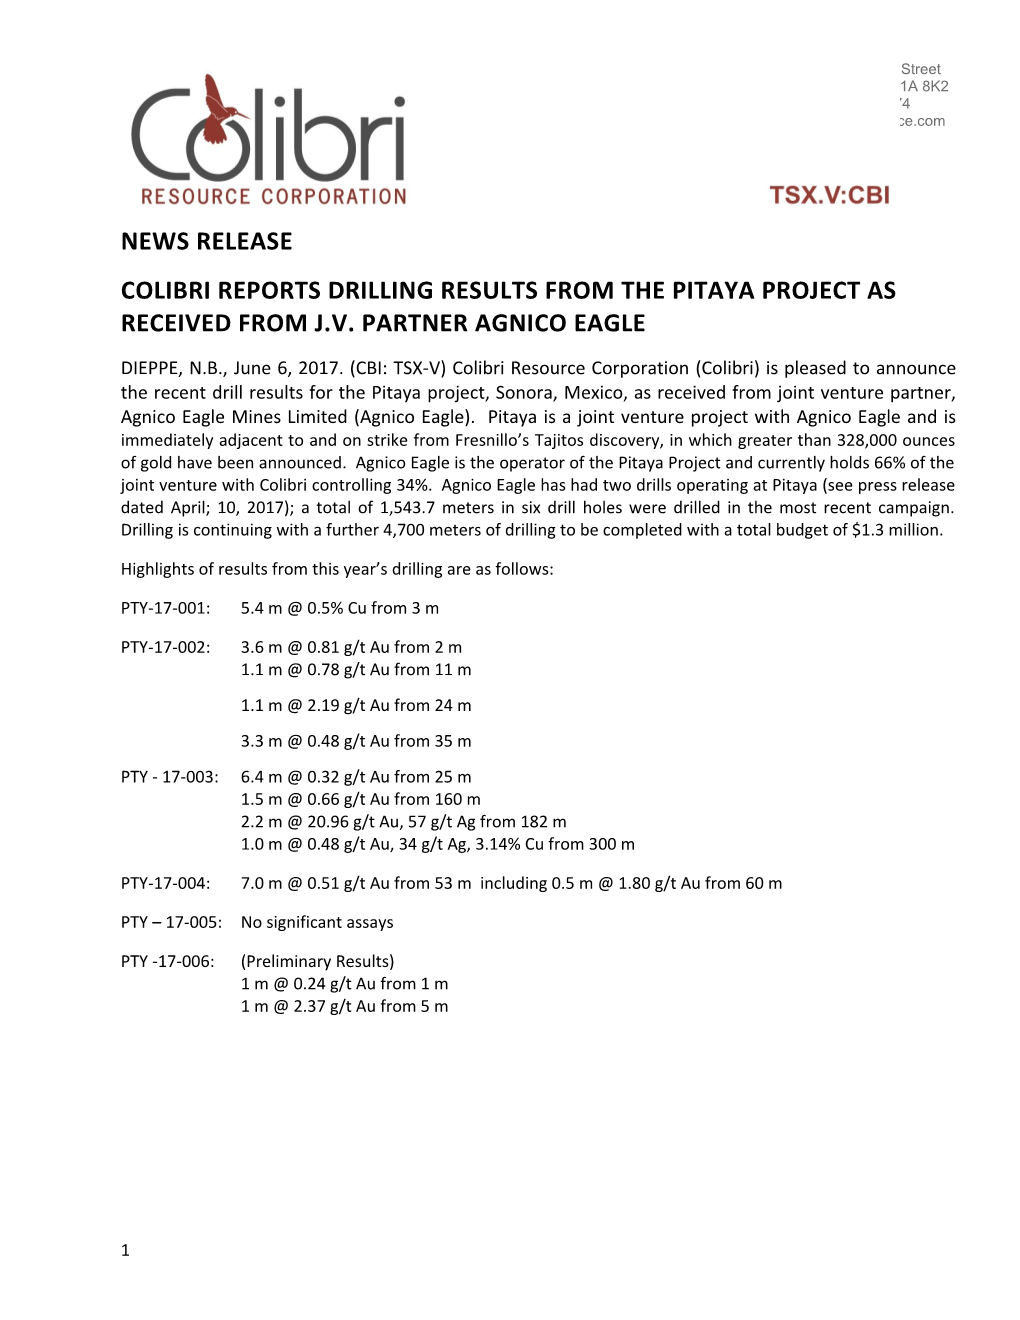 Colibri Reports Drilling Results from the Pitaya Project As Received from J.V. Partner